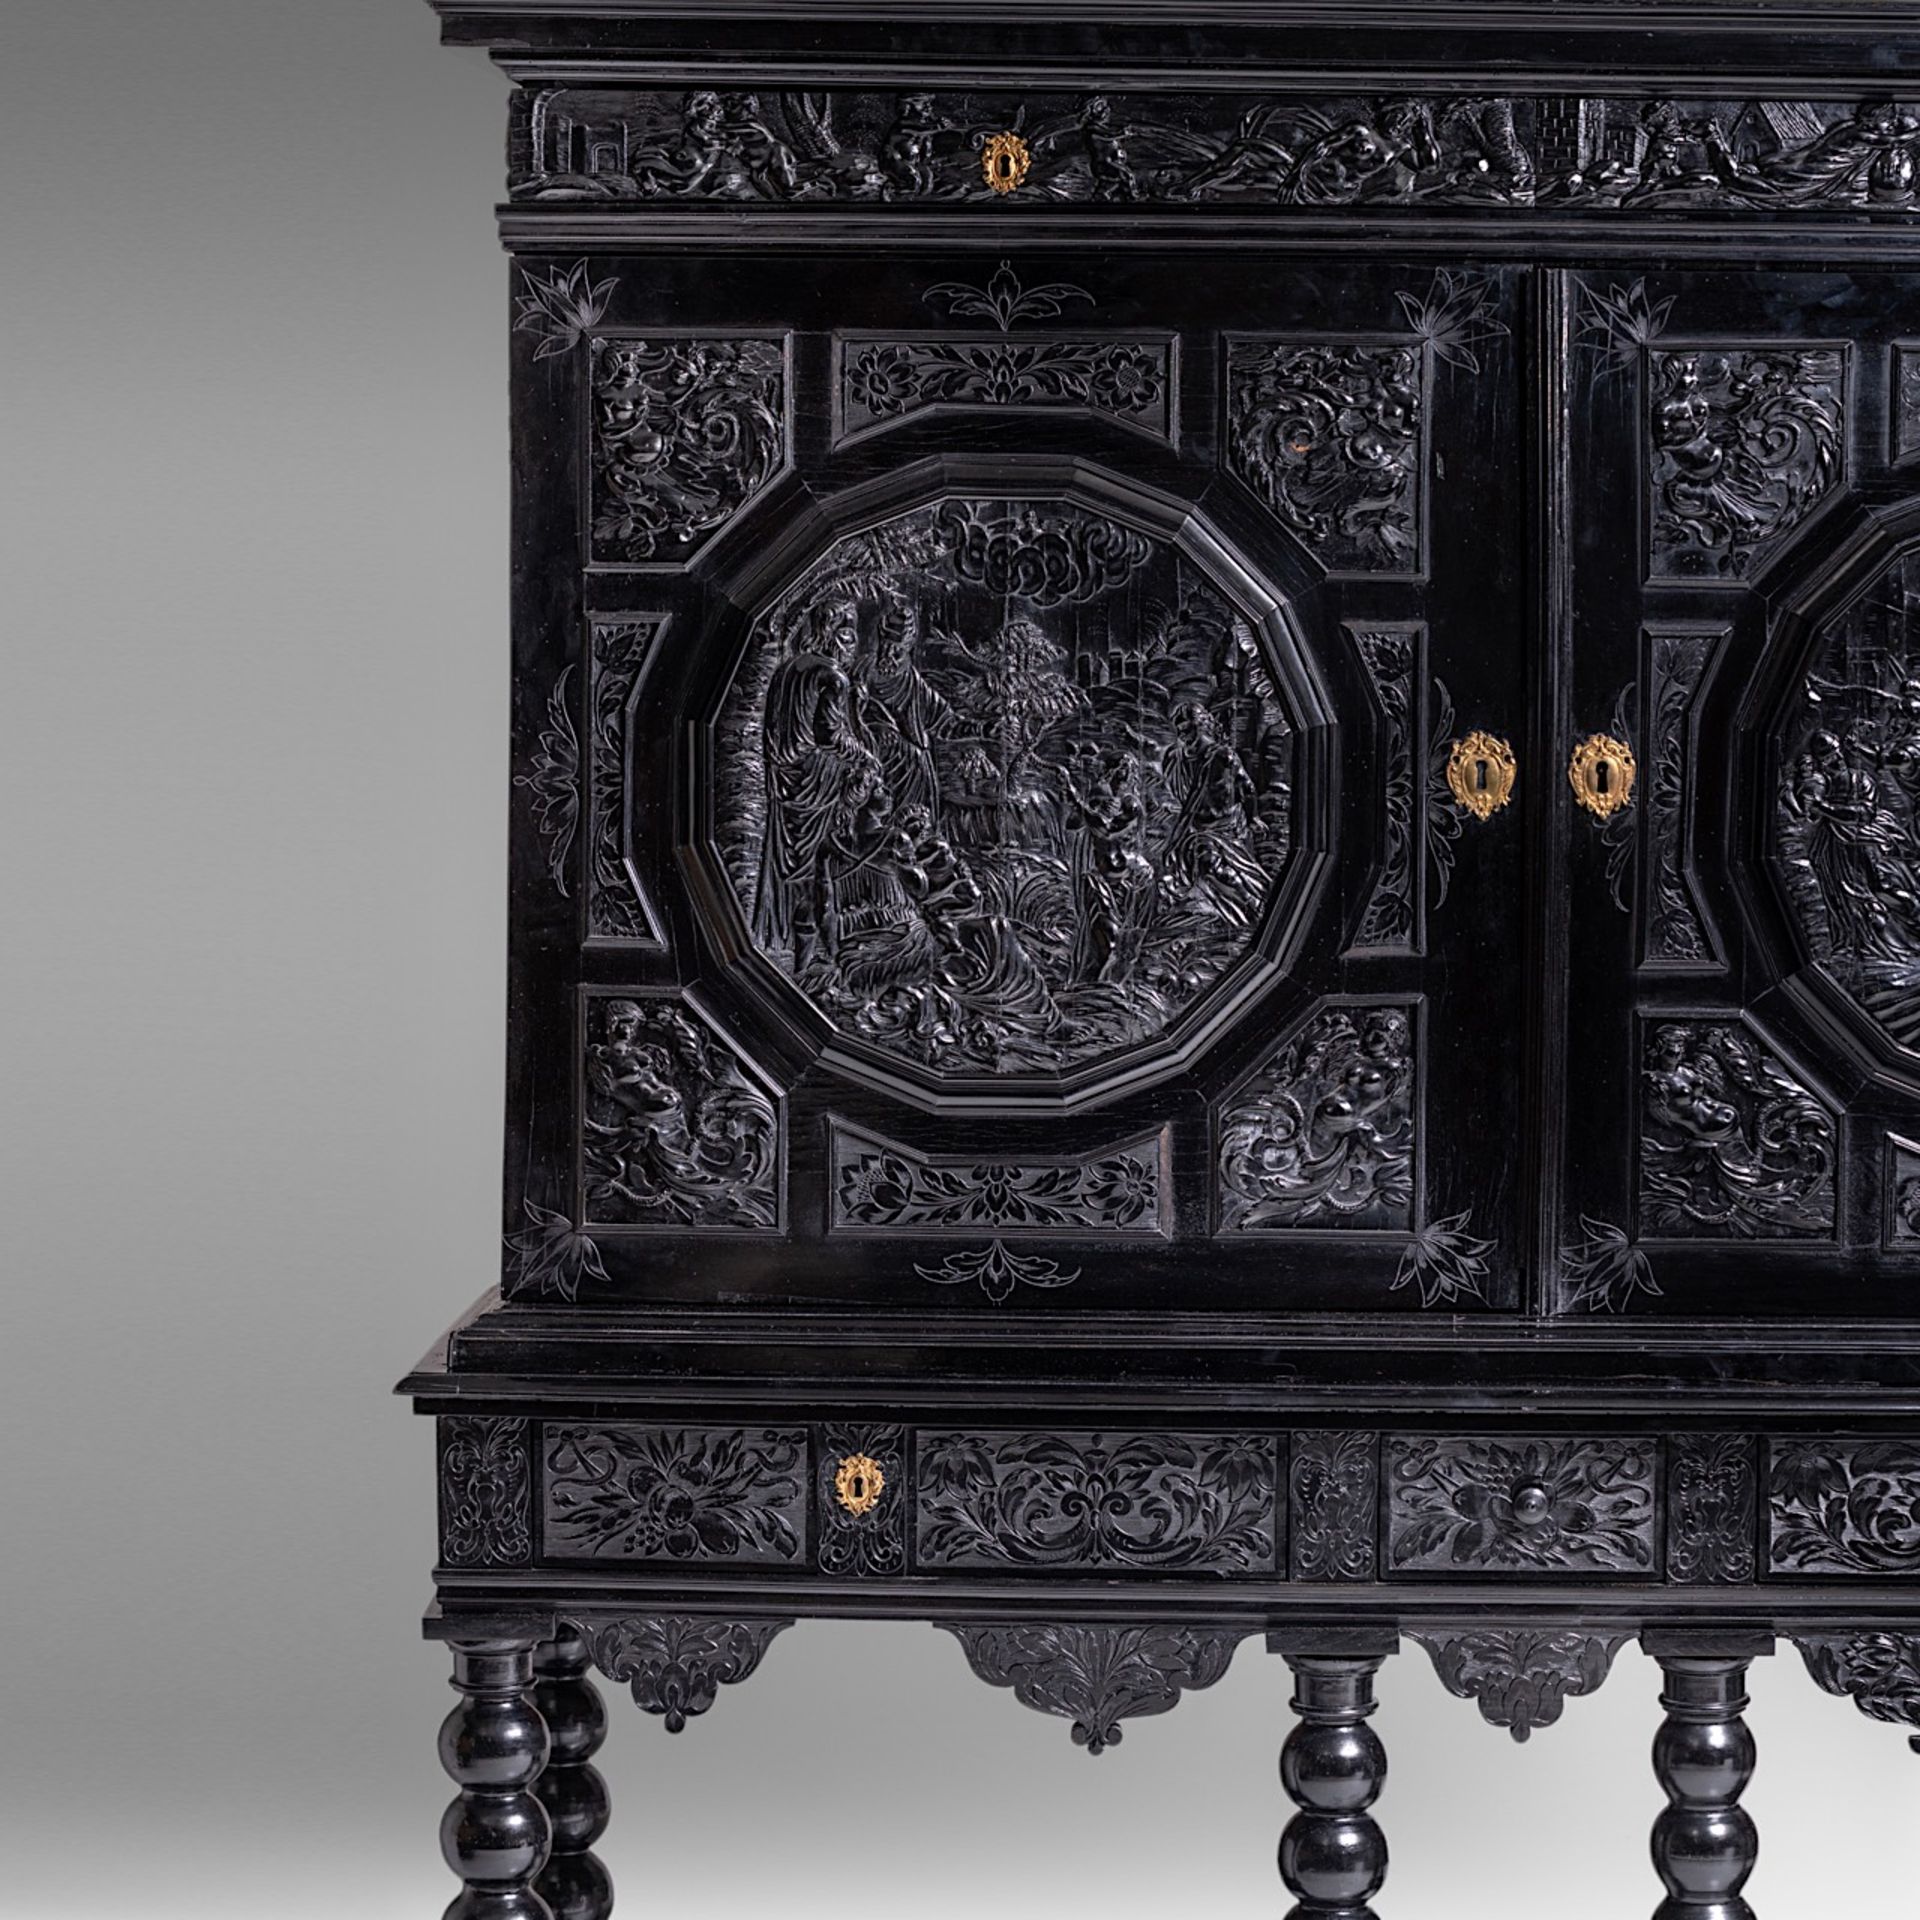 PREMIUM LOT - An exceptional 17thC French ebony and ebonised cabinet-on-stand, H 181,5 - W 163 - D 5 - Bild 12 aus 14